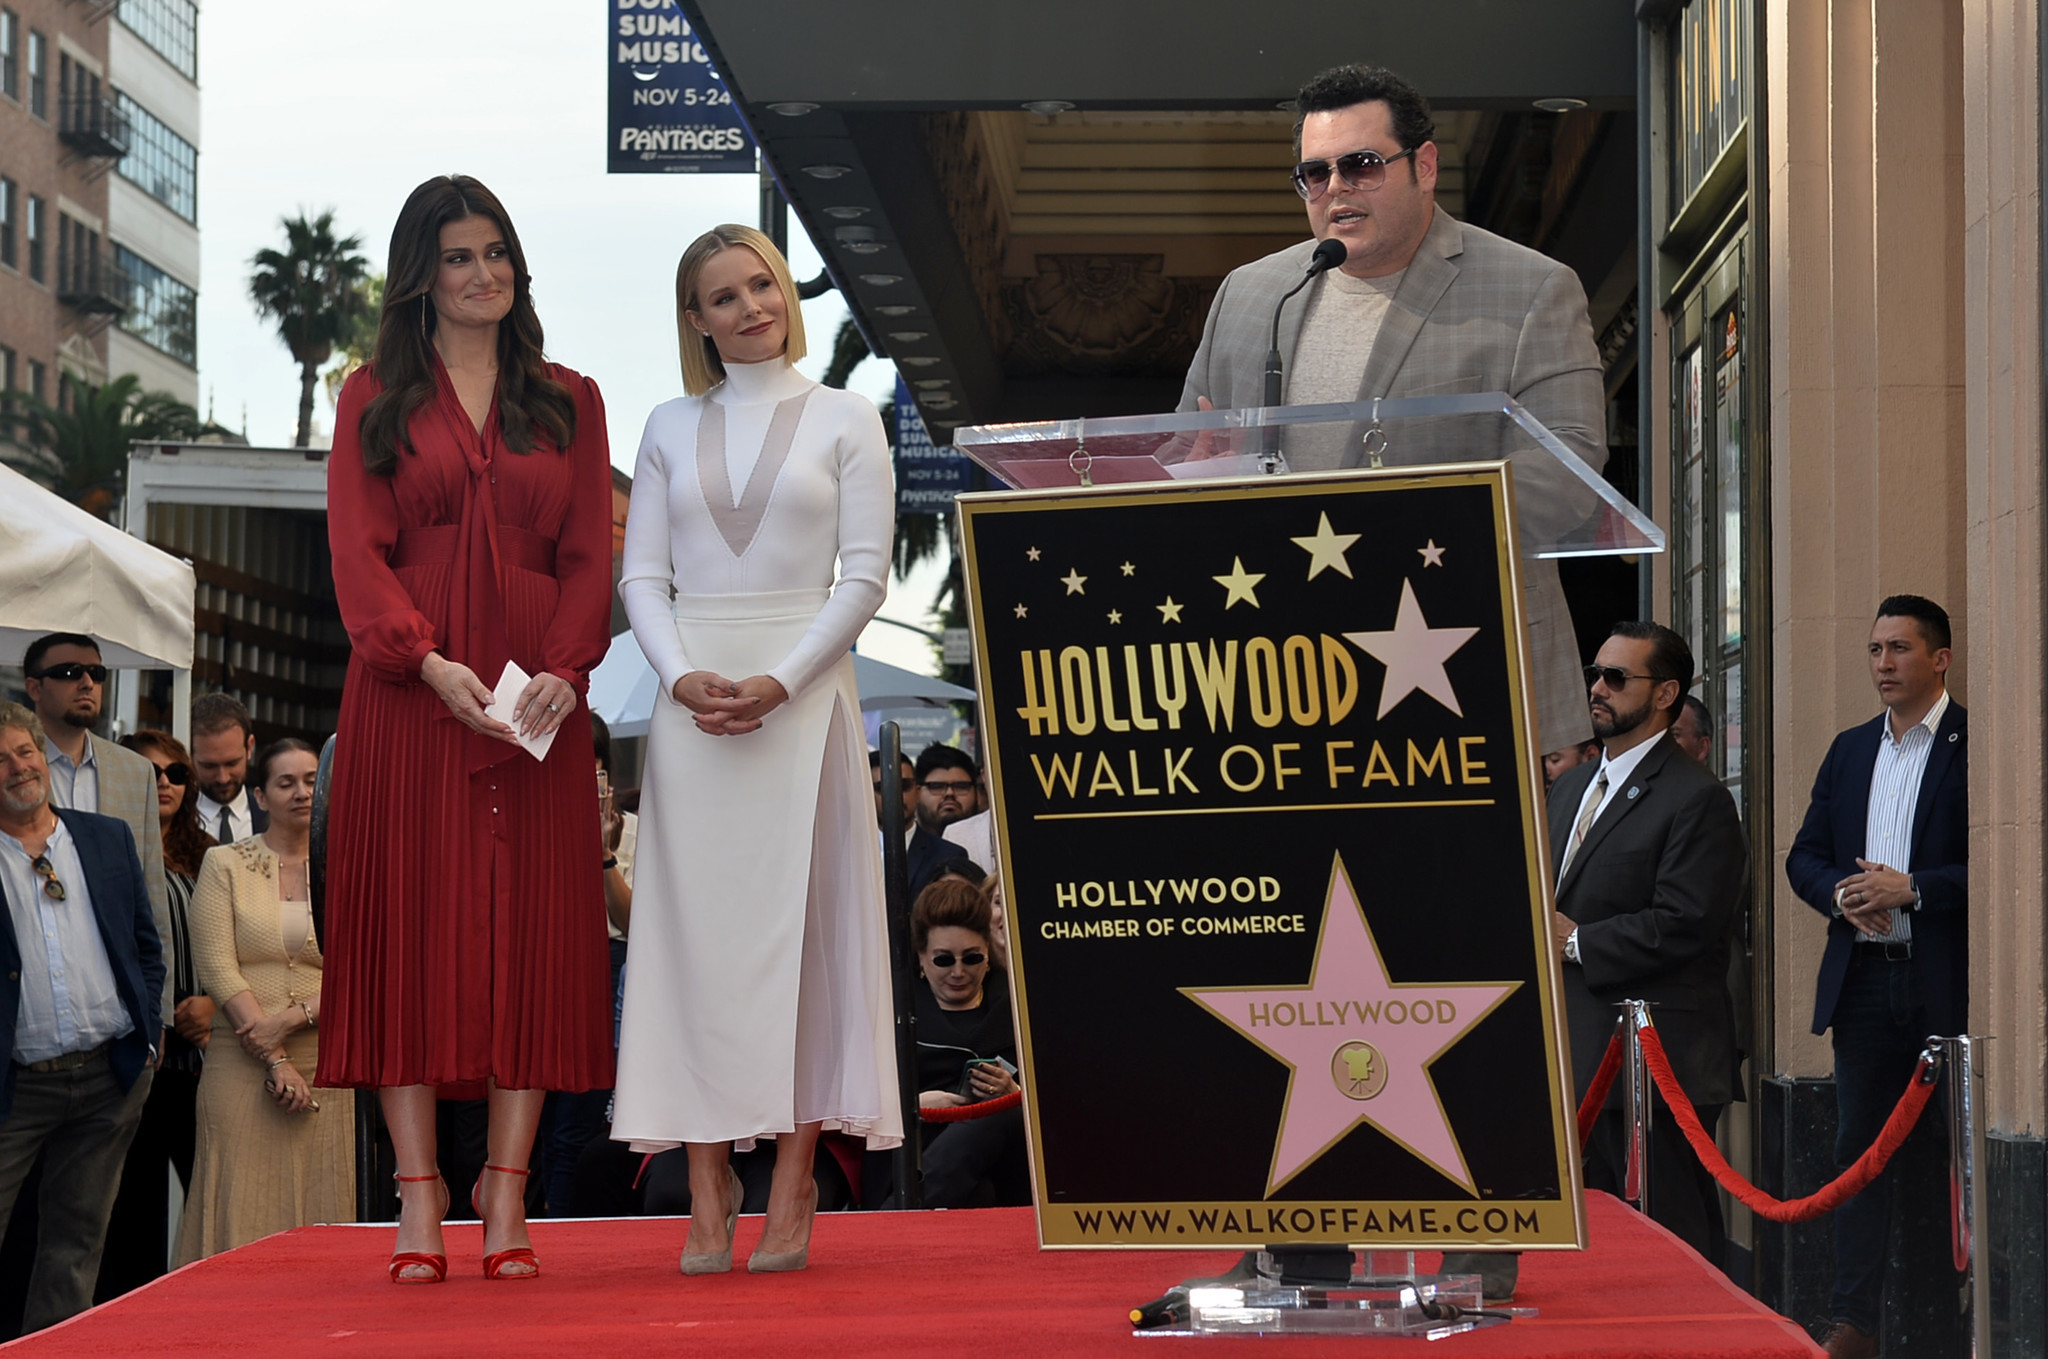 Kristen Bell and Idina Menzel were all smiles during their joint ceremony to unveil their stars on the Hollywood Walk of Fame on Nov. 19, 2019. The 